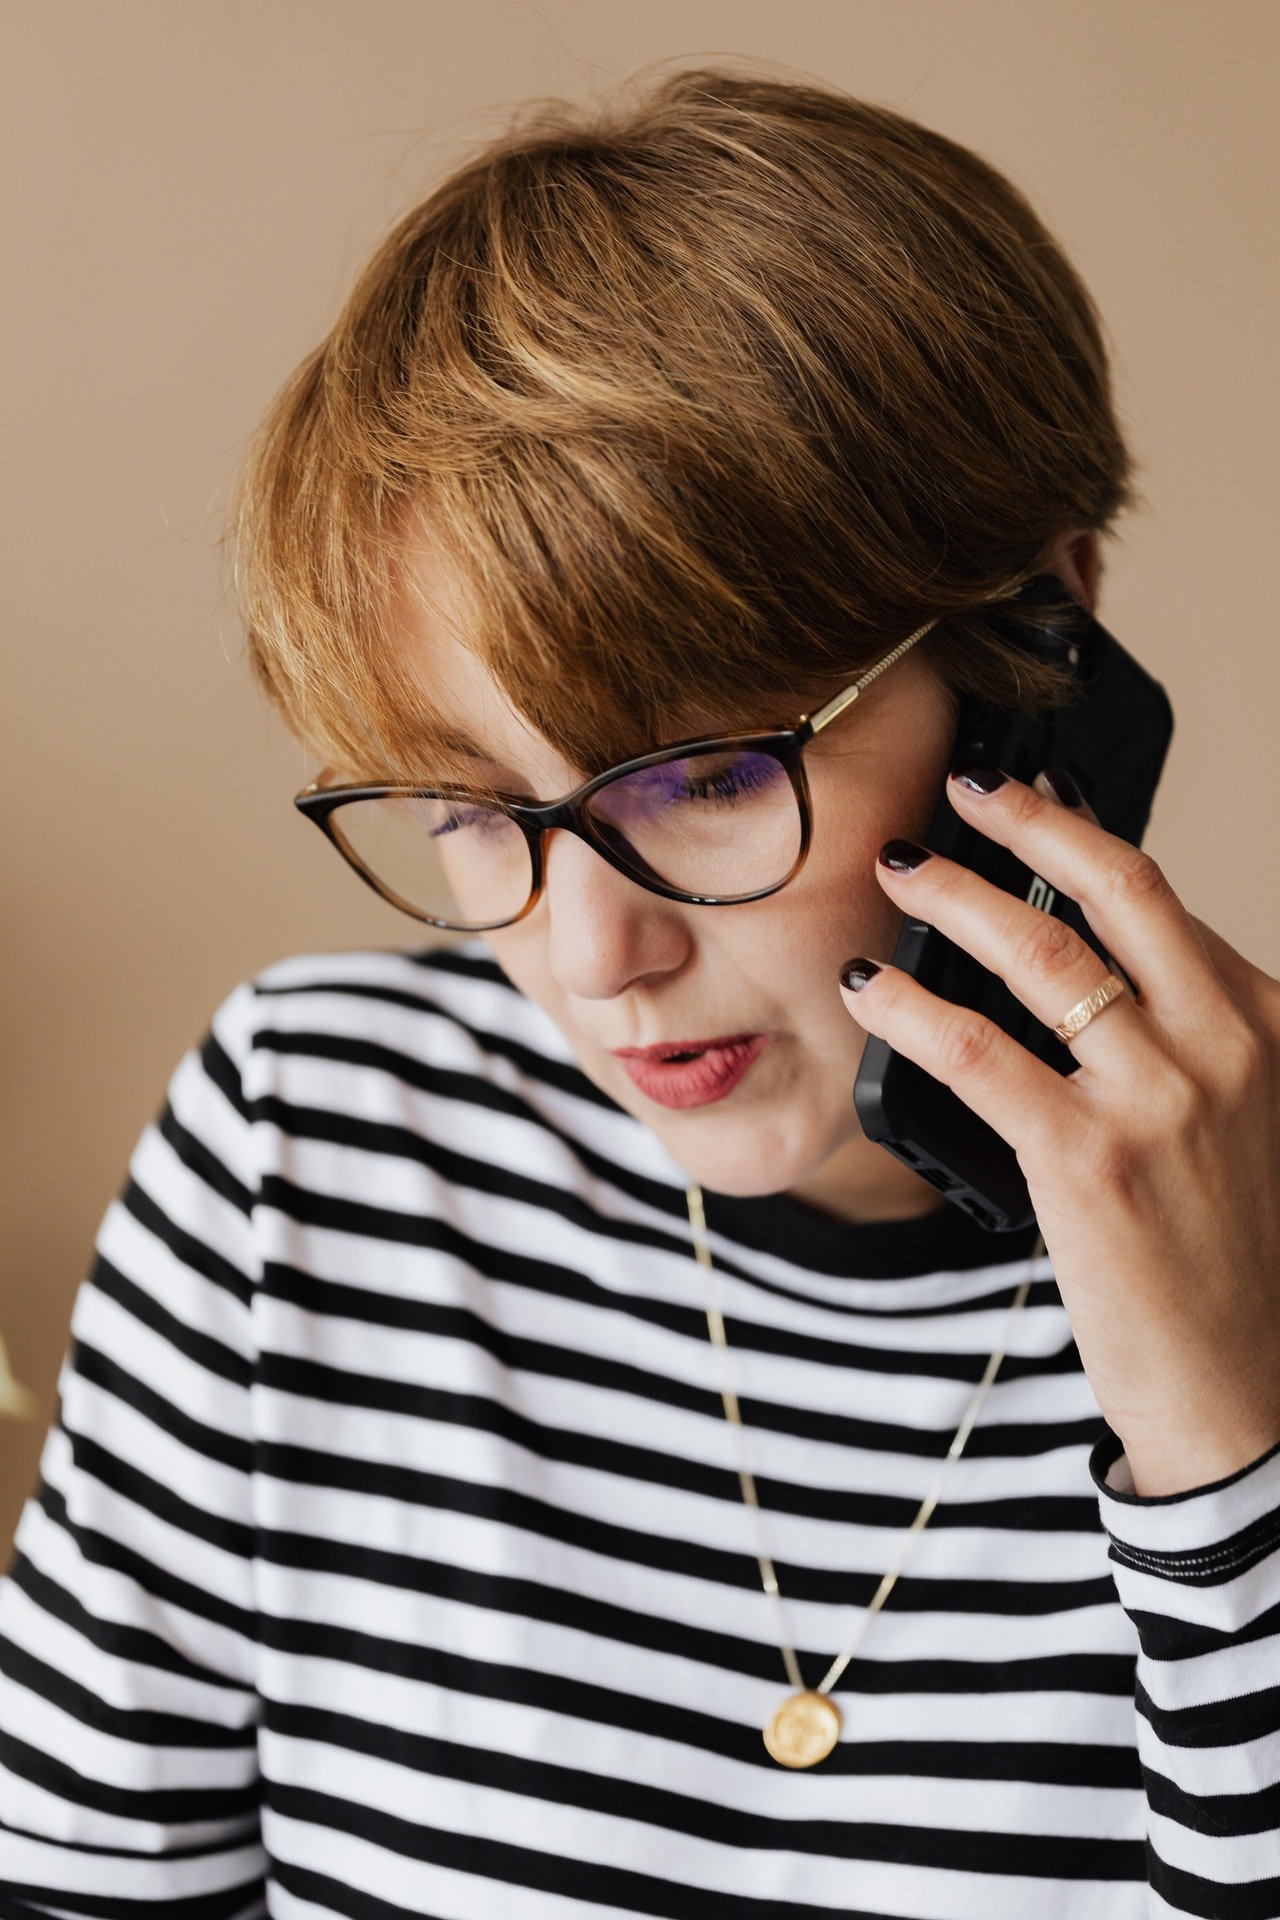 She talked to Stella on the phone and discovered something shocking. | Source: Pexels